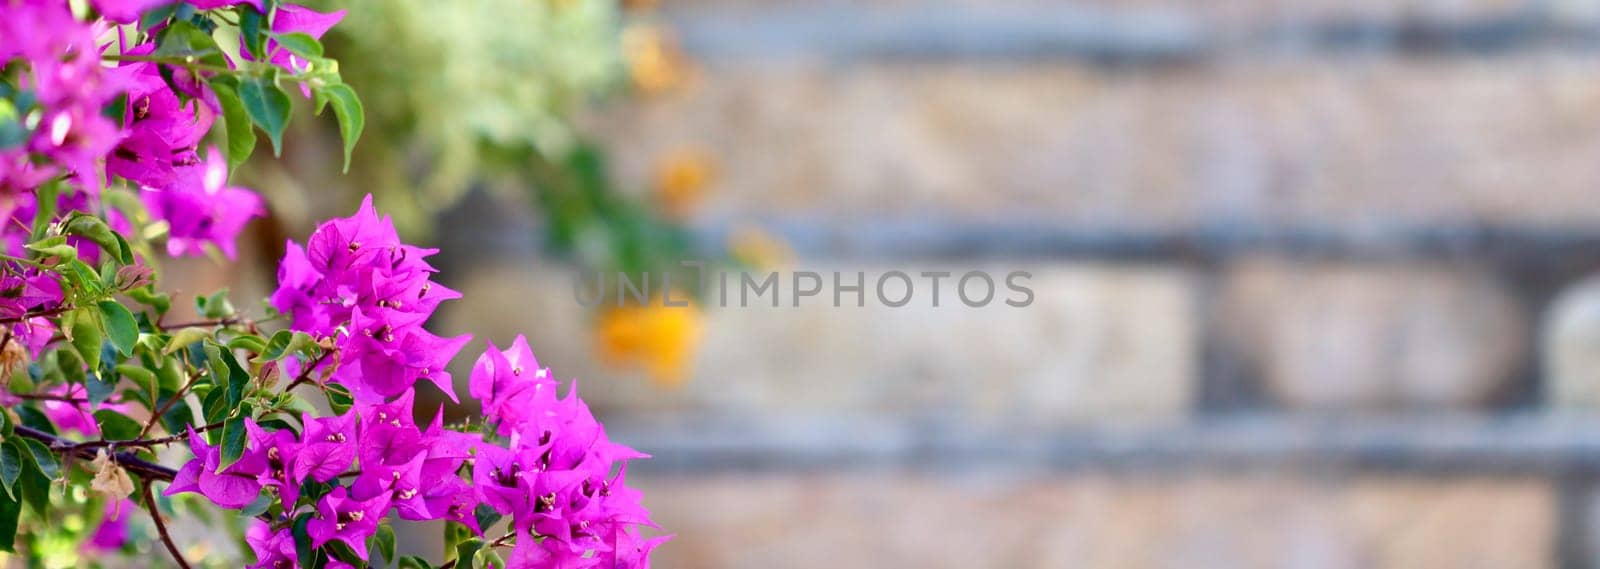 Blooming pink bougainvillea against the background of stone steps of the staircase. Tropical flowers background